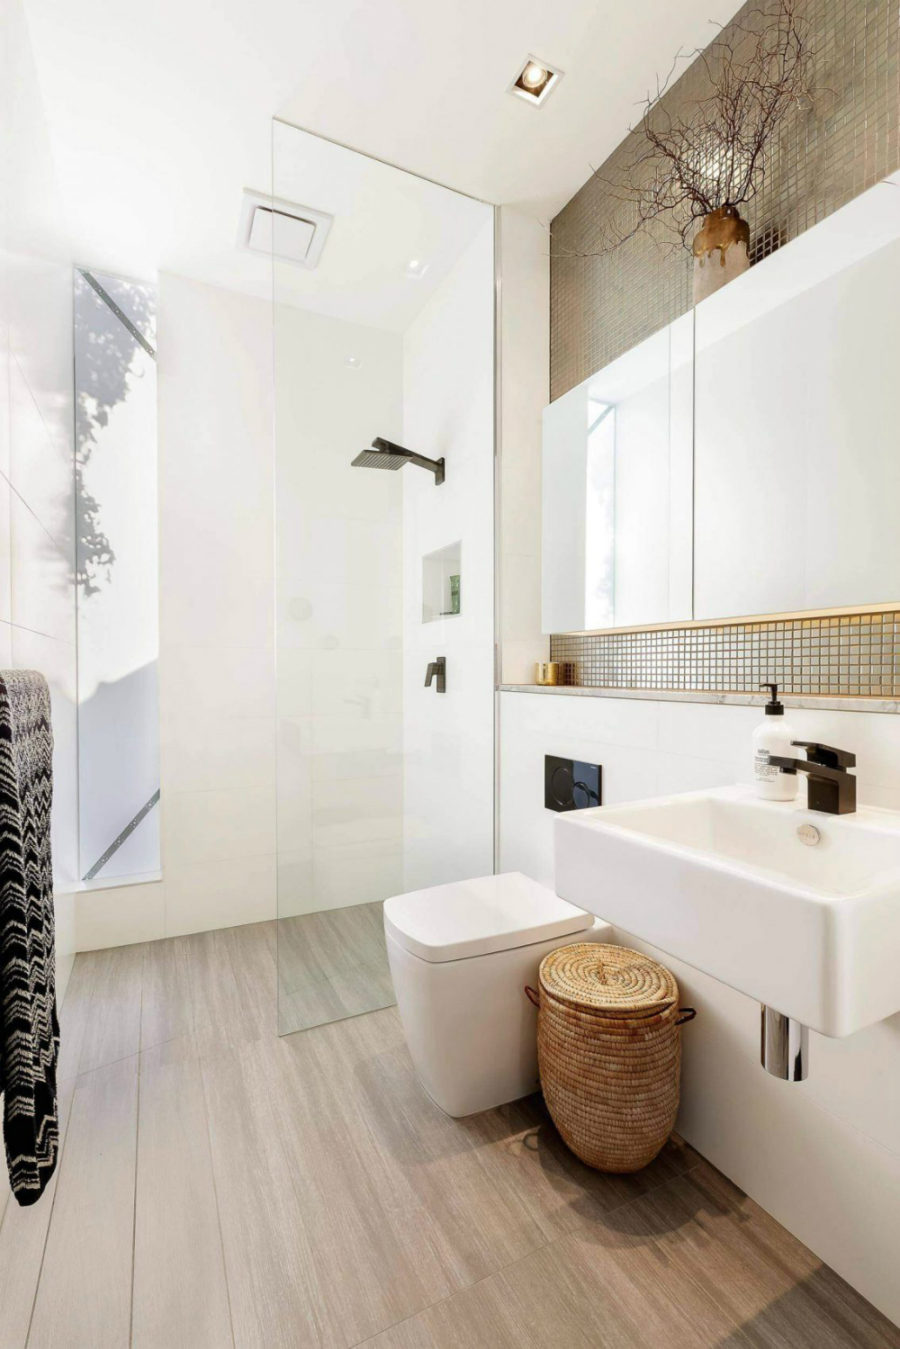 The shower features a glazed inclusion that opens up the space to outdoors